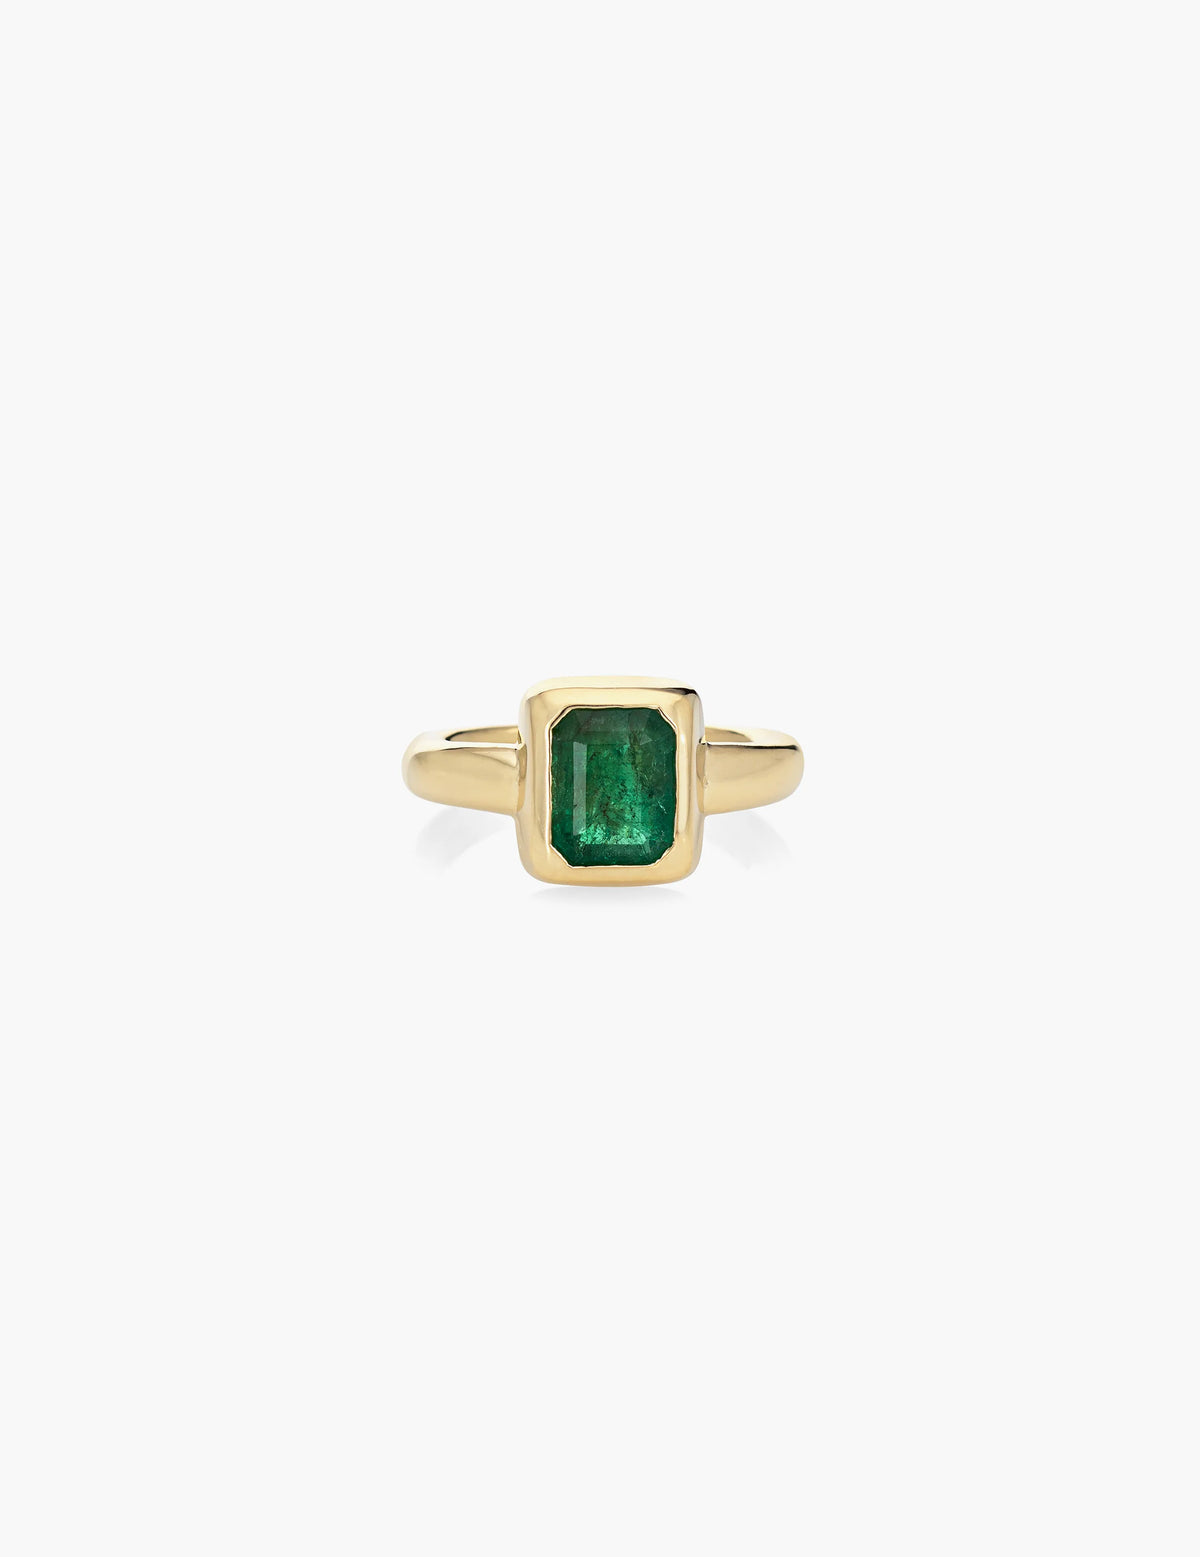 Hand Carved 1.7ct Emerald Ring Set in 18k